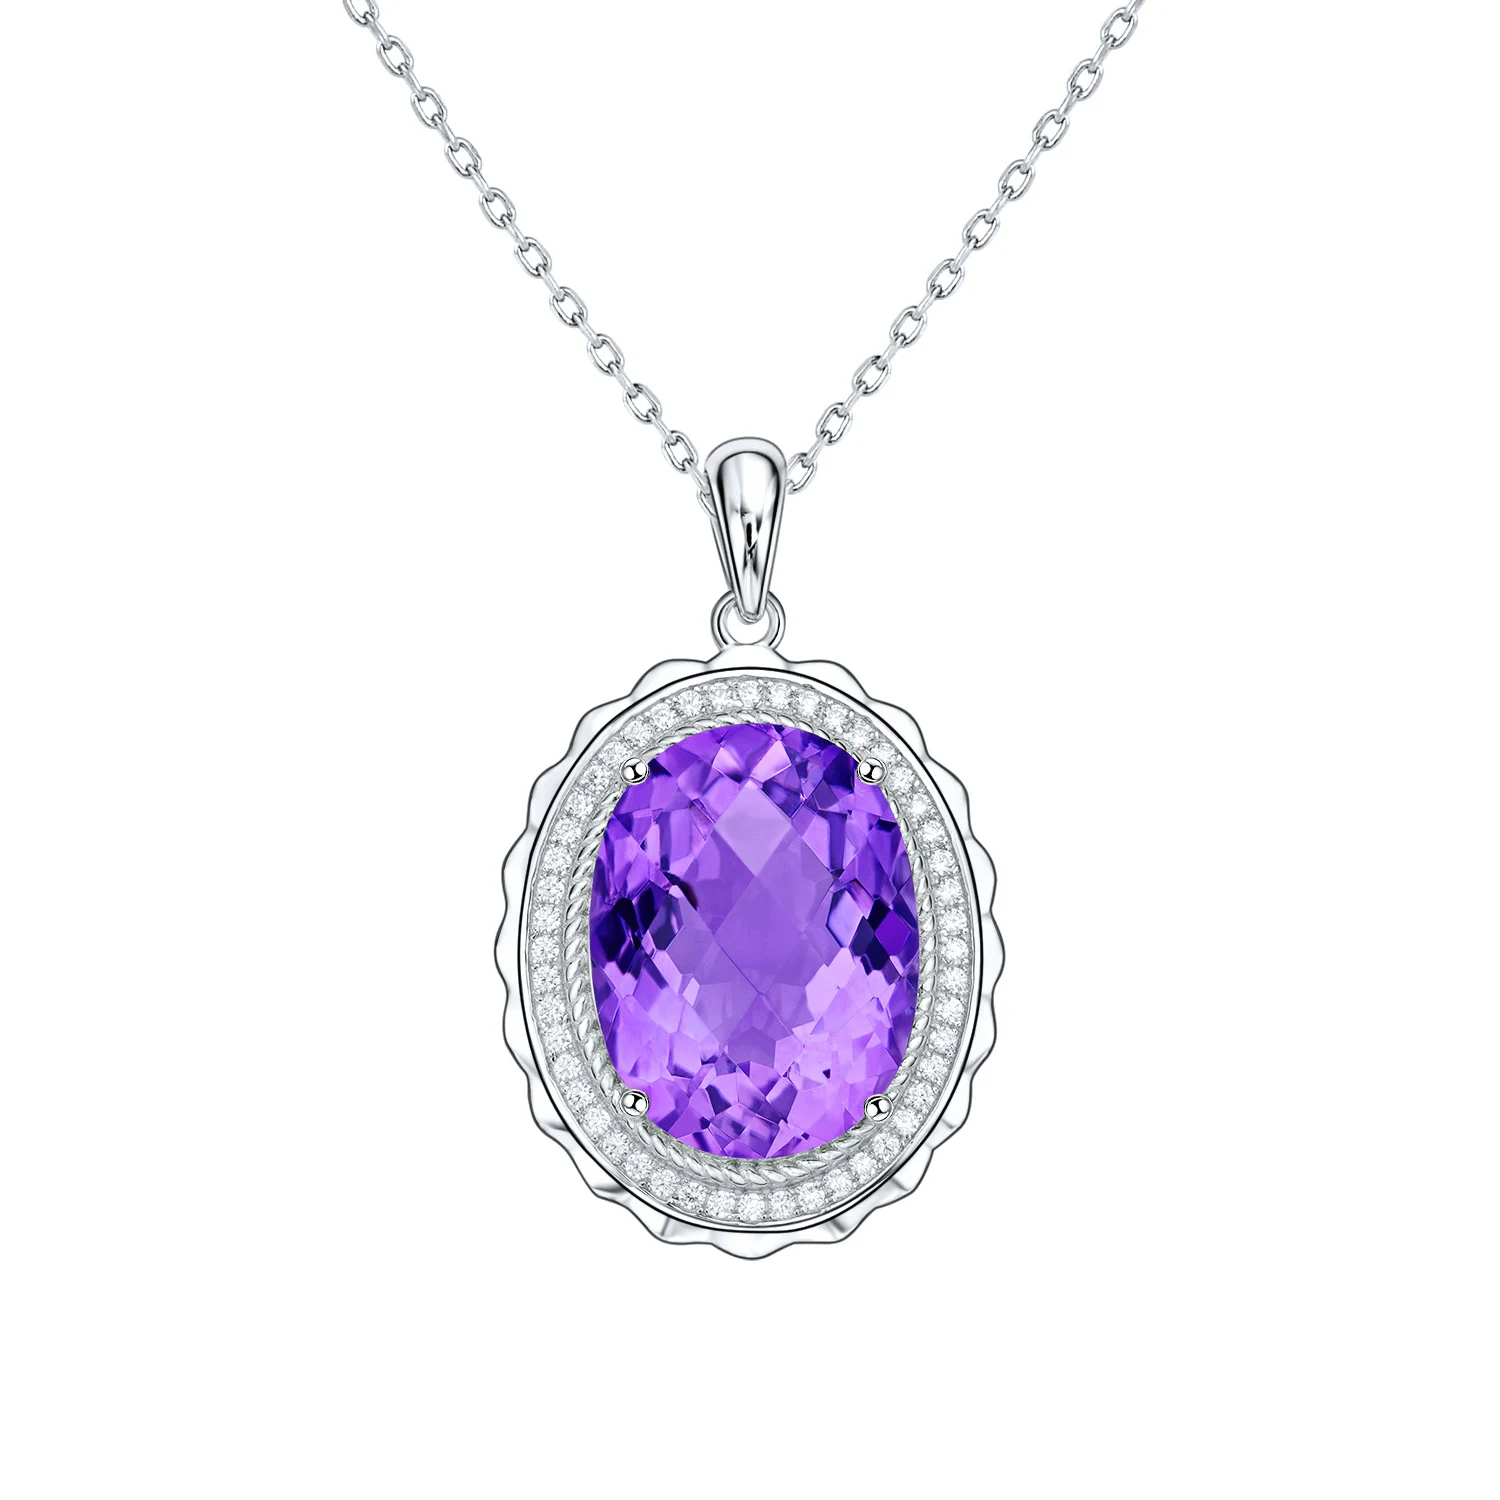 Elegant oval pendant necklace with amethyst birthstone - main